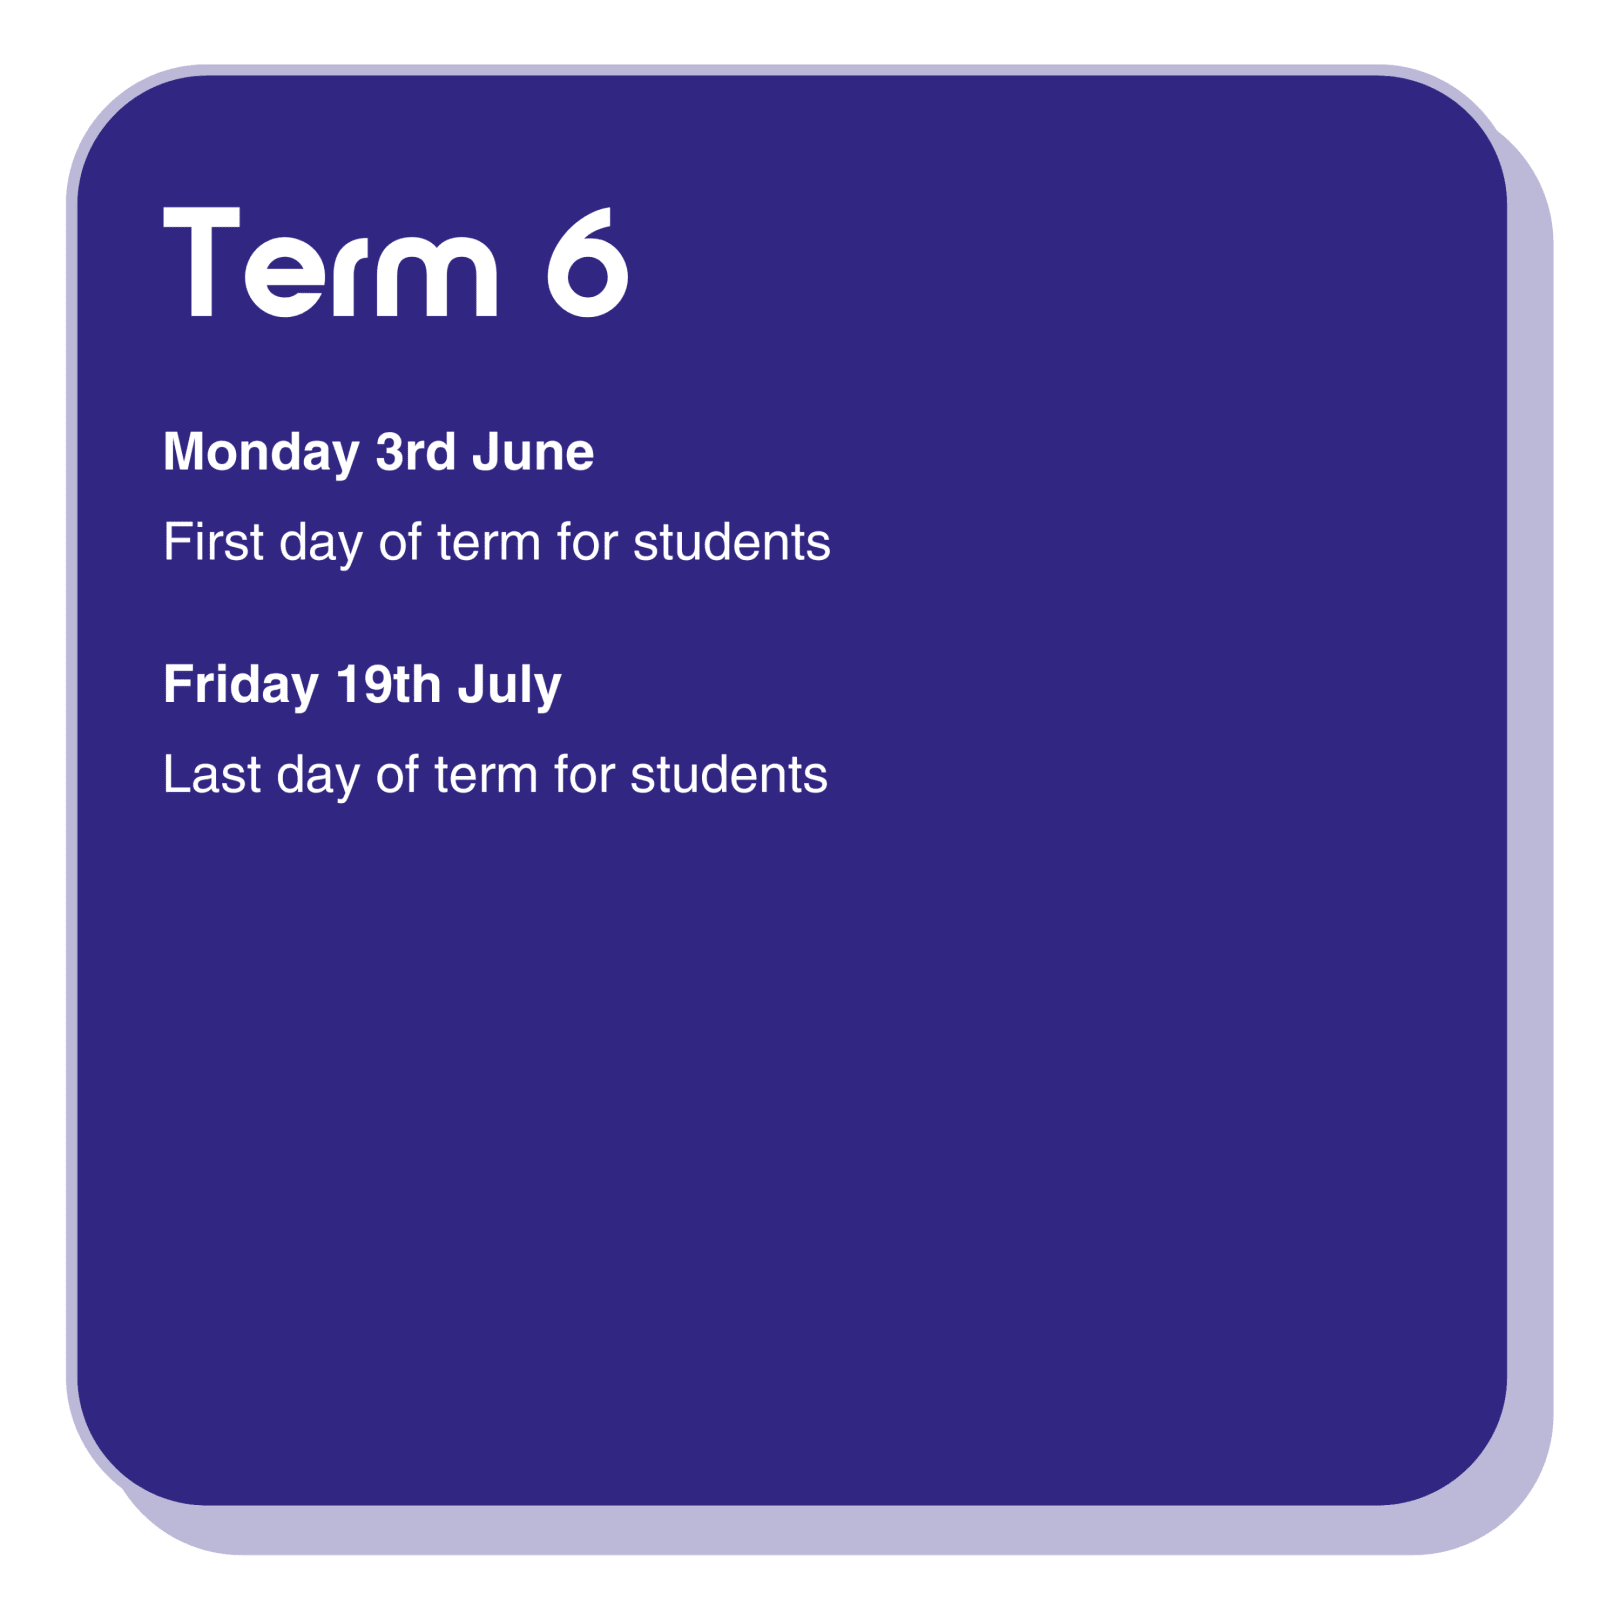 Term 6 dates information infographic with the following text:  Monday 3rd June is the first day of term for students. Friday 19th July is the last day of term for students.